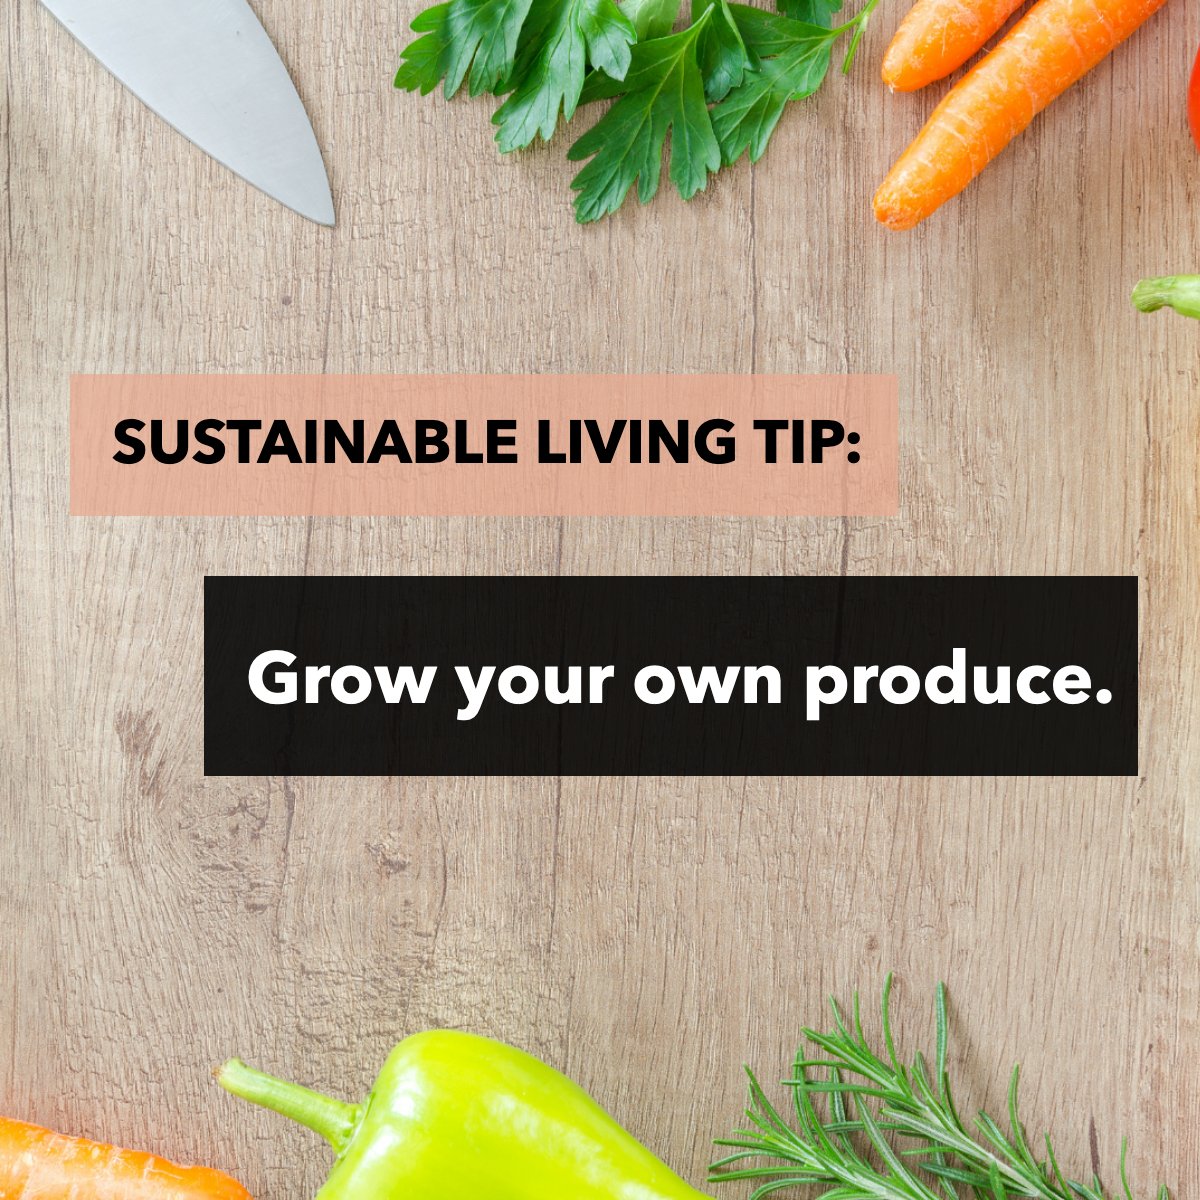 Do you cultivate some of your vegetables or food 🍅?  This is not only healthier but extremely sustainable! 

#sustainablelifestyle    #sustainable    #sustainablity    #sustainablefood 
#vanessapruetturierealtor